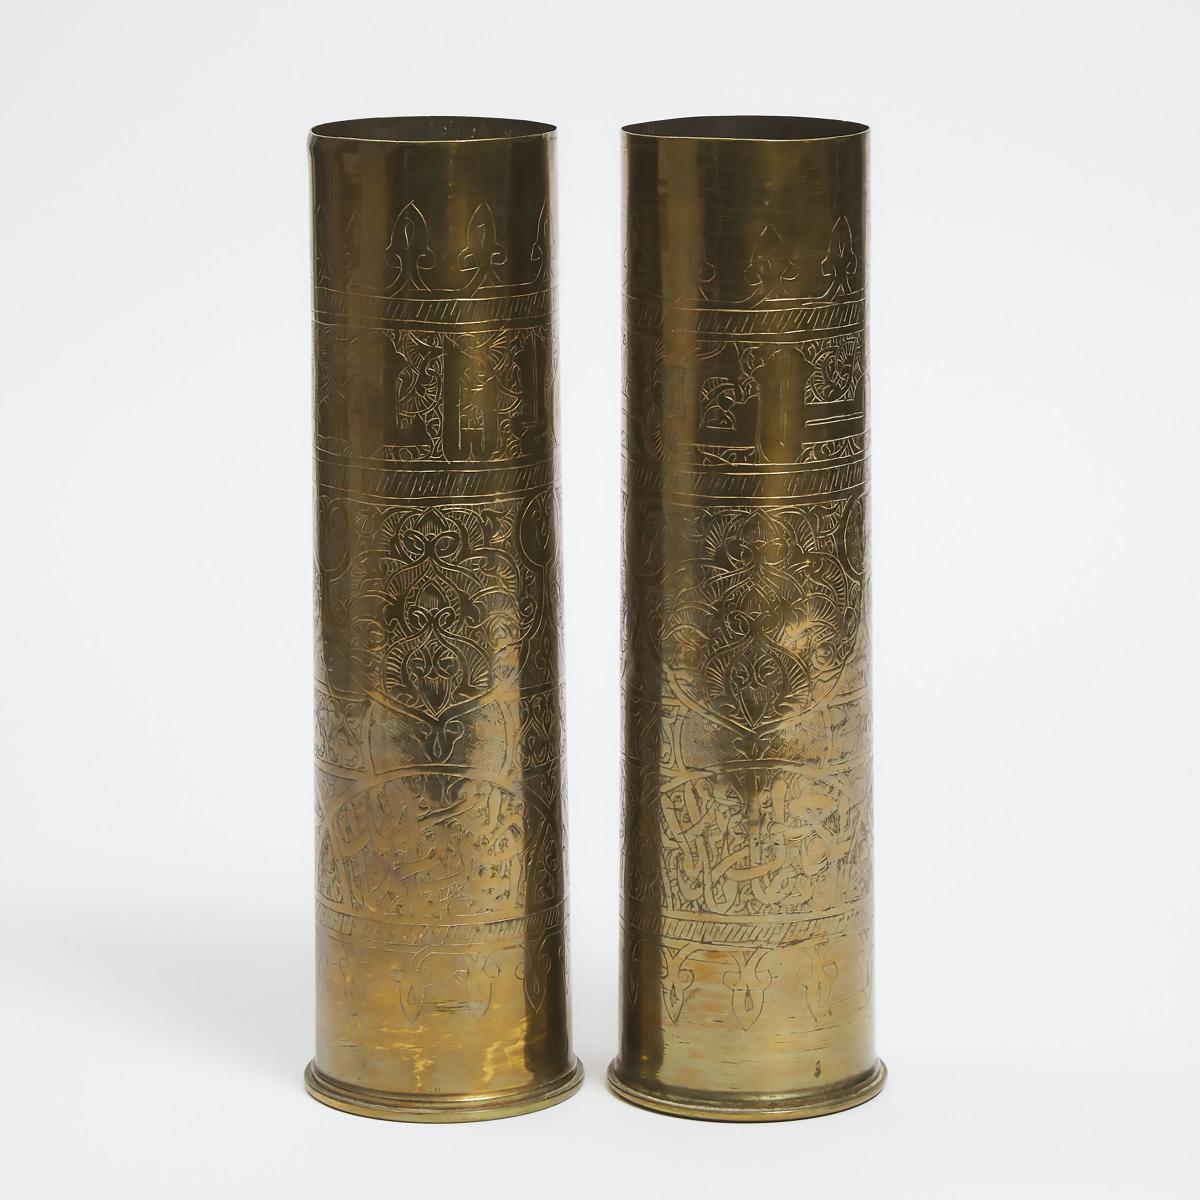 Pair of Middle Eastern 'Trench Art' Shell Casing Vases, early 20th century, each height 12.5 in — 31